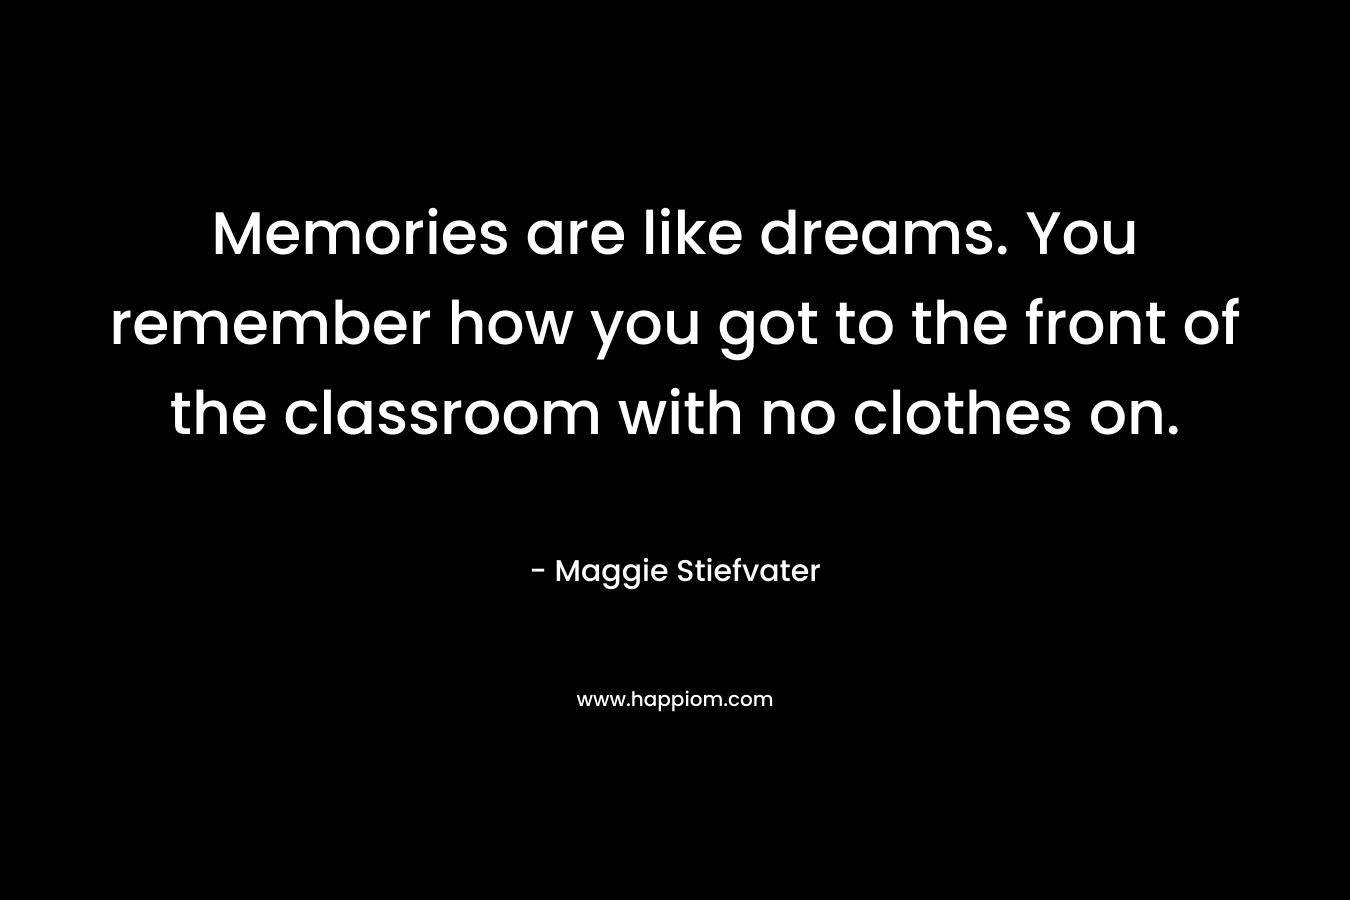 Memories are like dreams. You remember how you got to the front of the classroom with no clothes on.